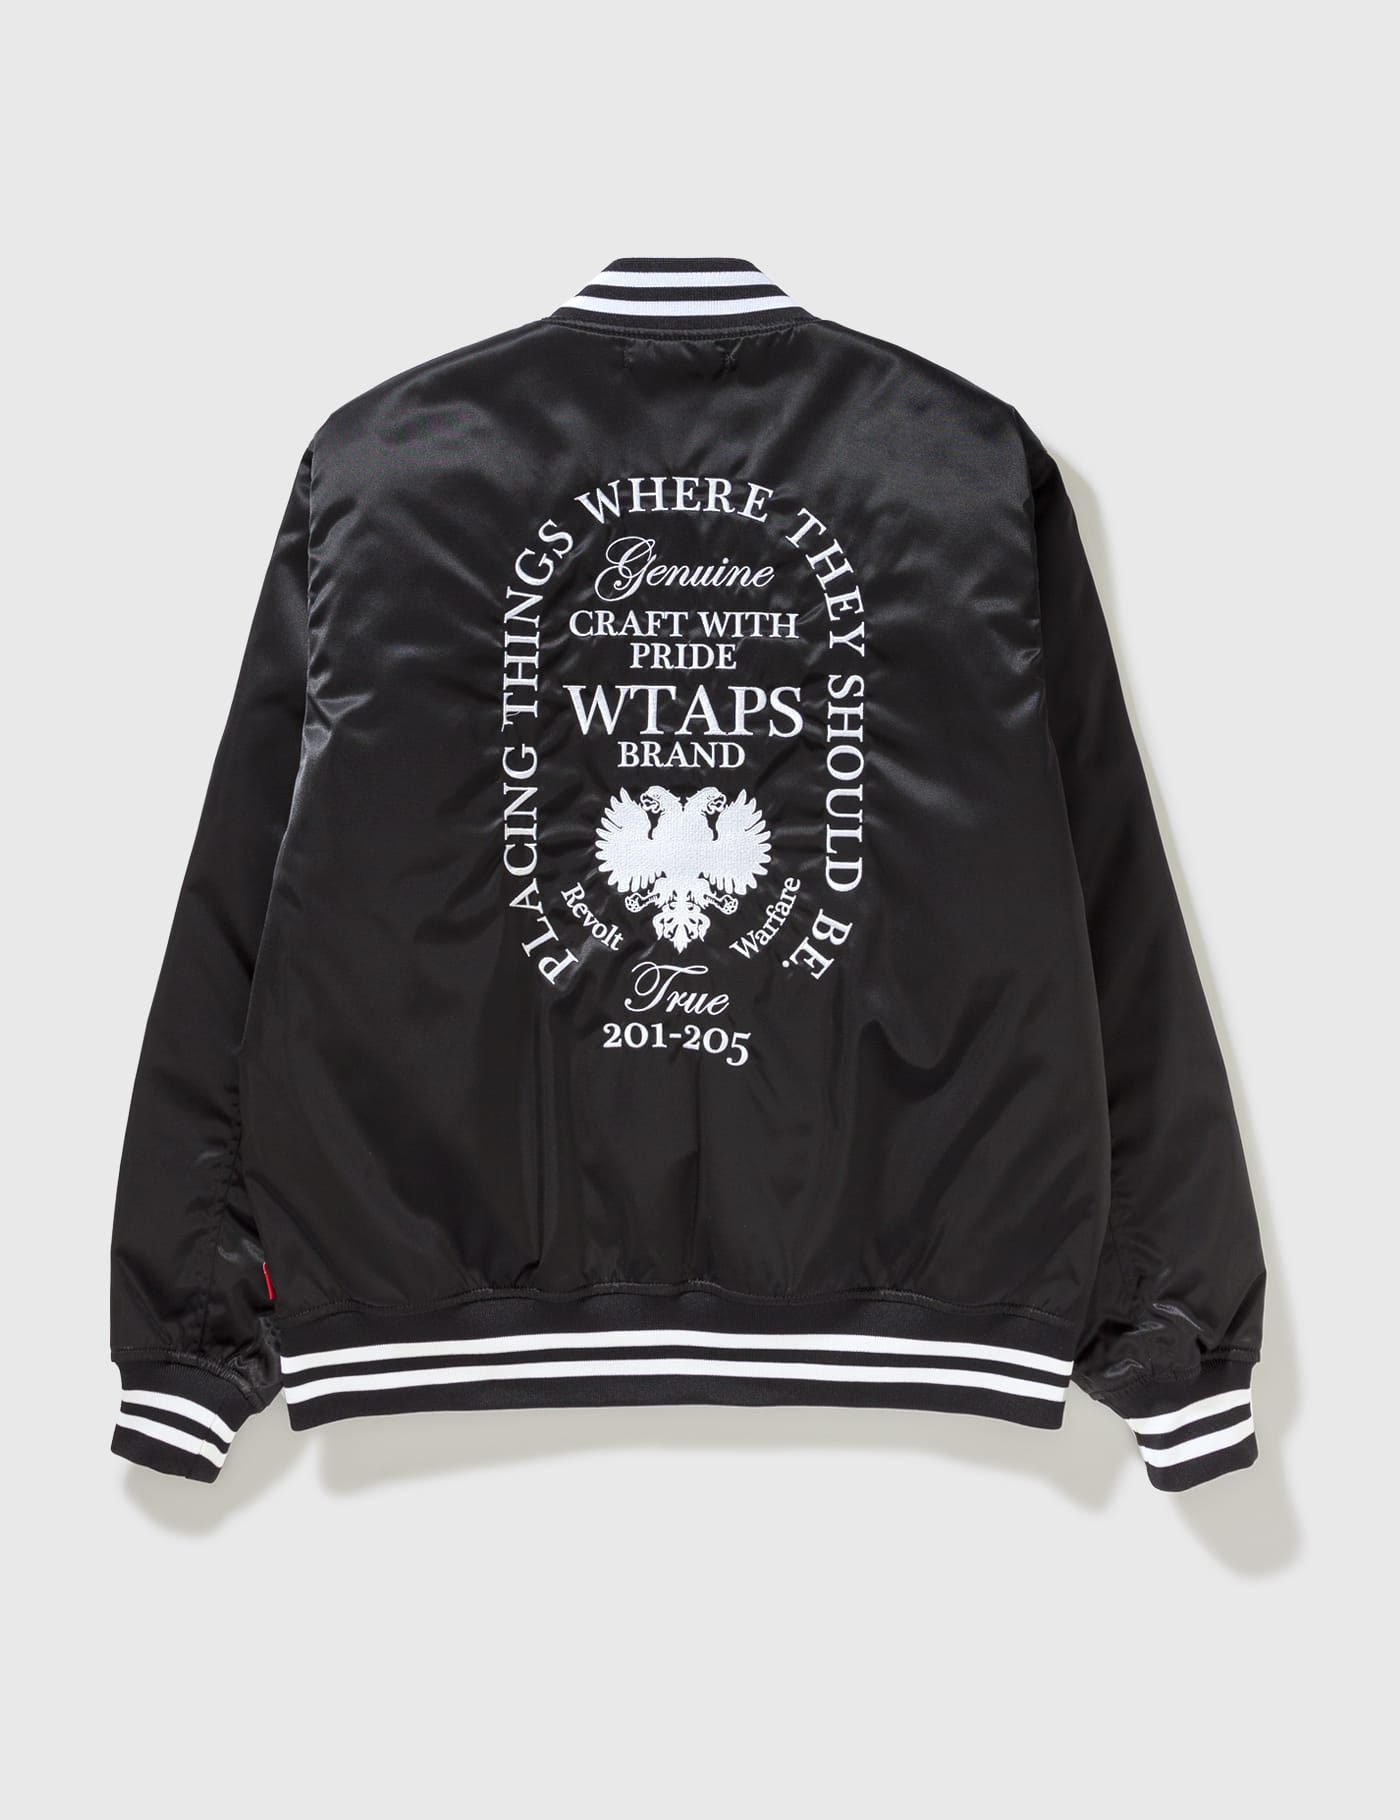 WTAPS | HBX - Globally Curated Fashion and Lifestyle by Hypebeast